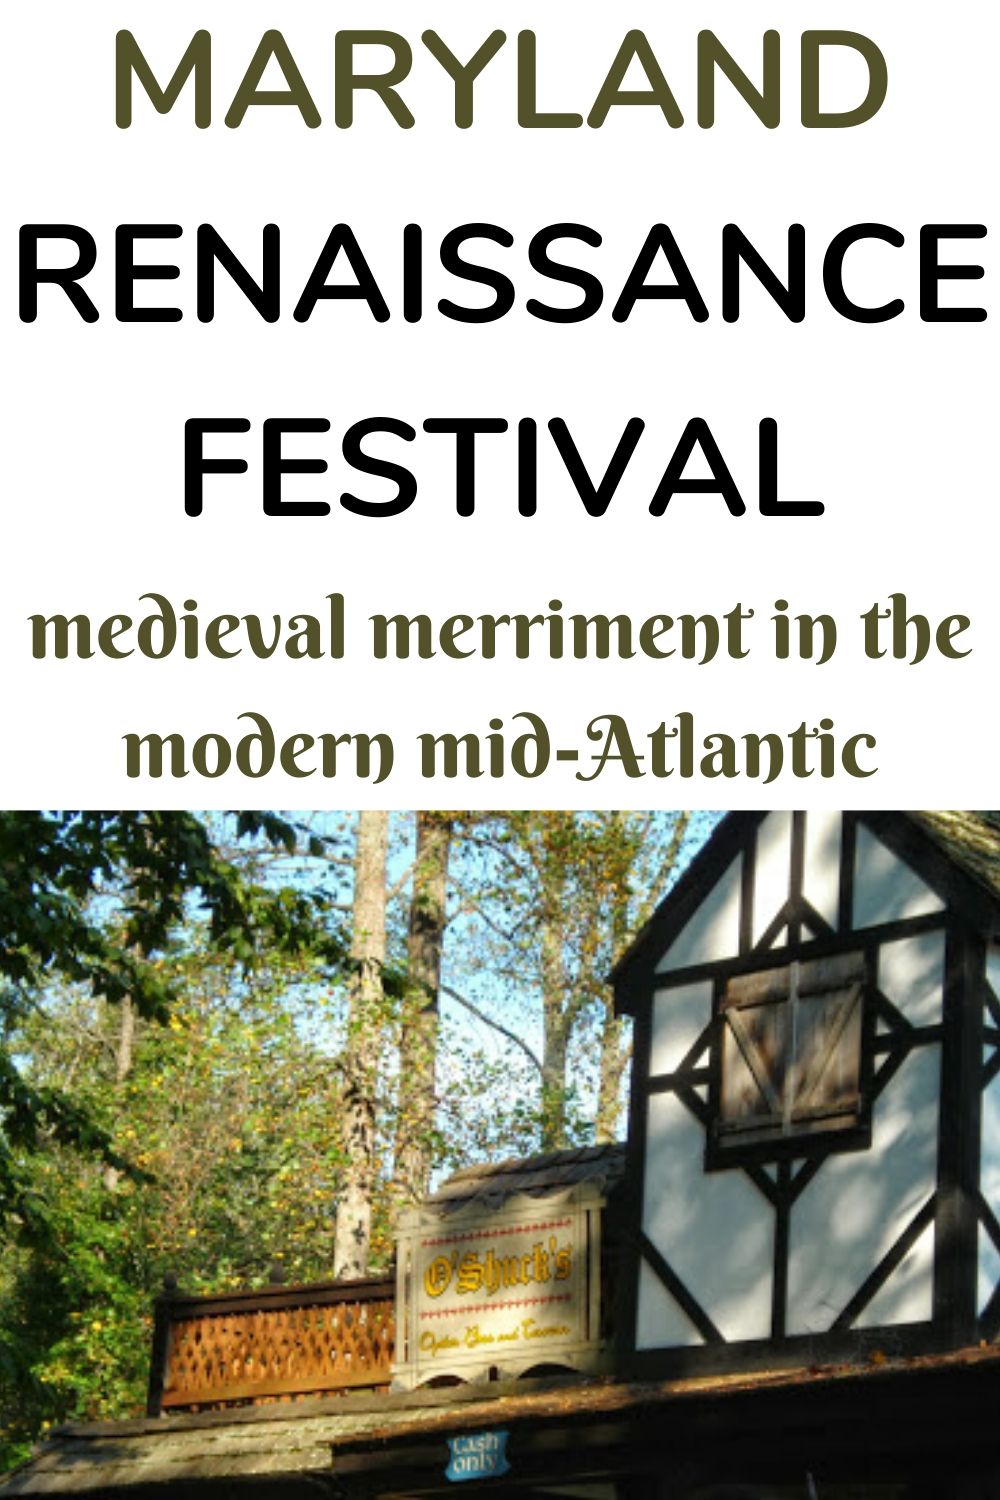 Maryland Renaissance Festival in Annapolis